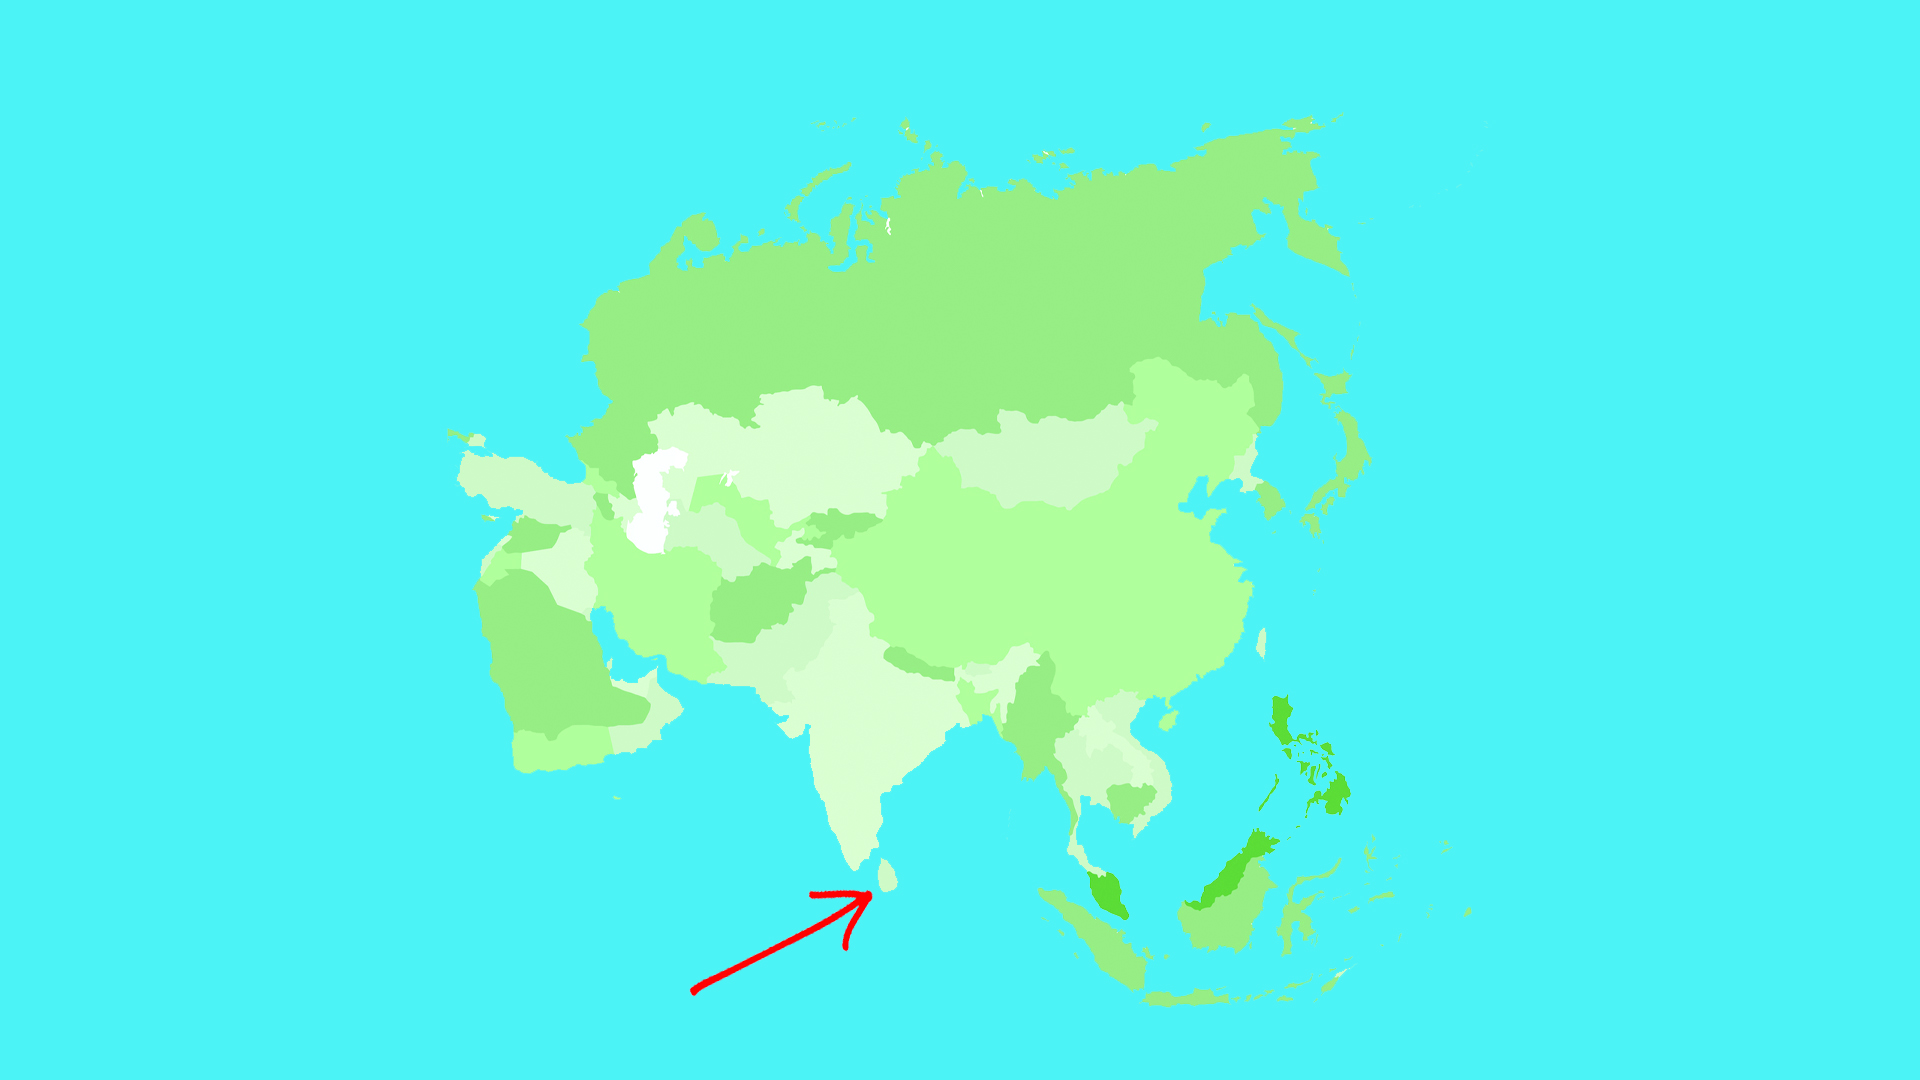 A map of Asia with an arrow pointing to an island off the coast of India